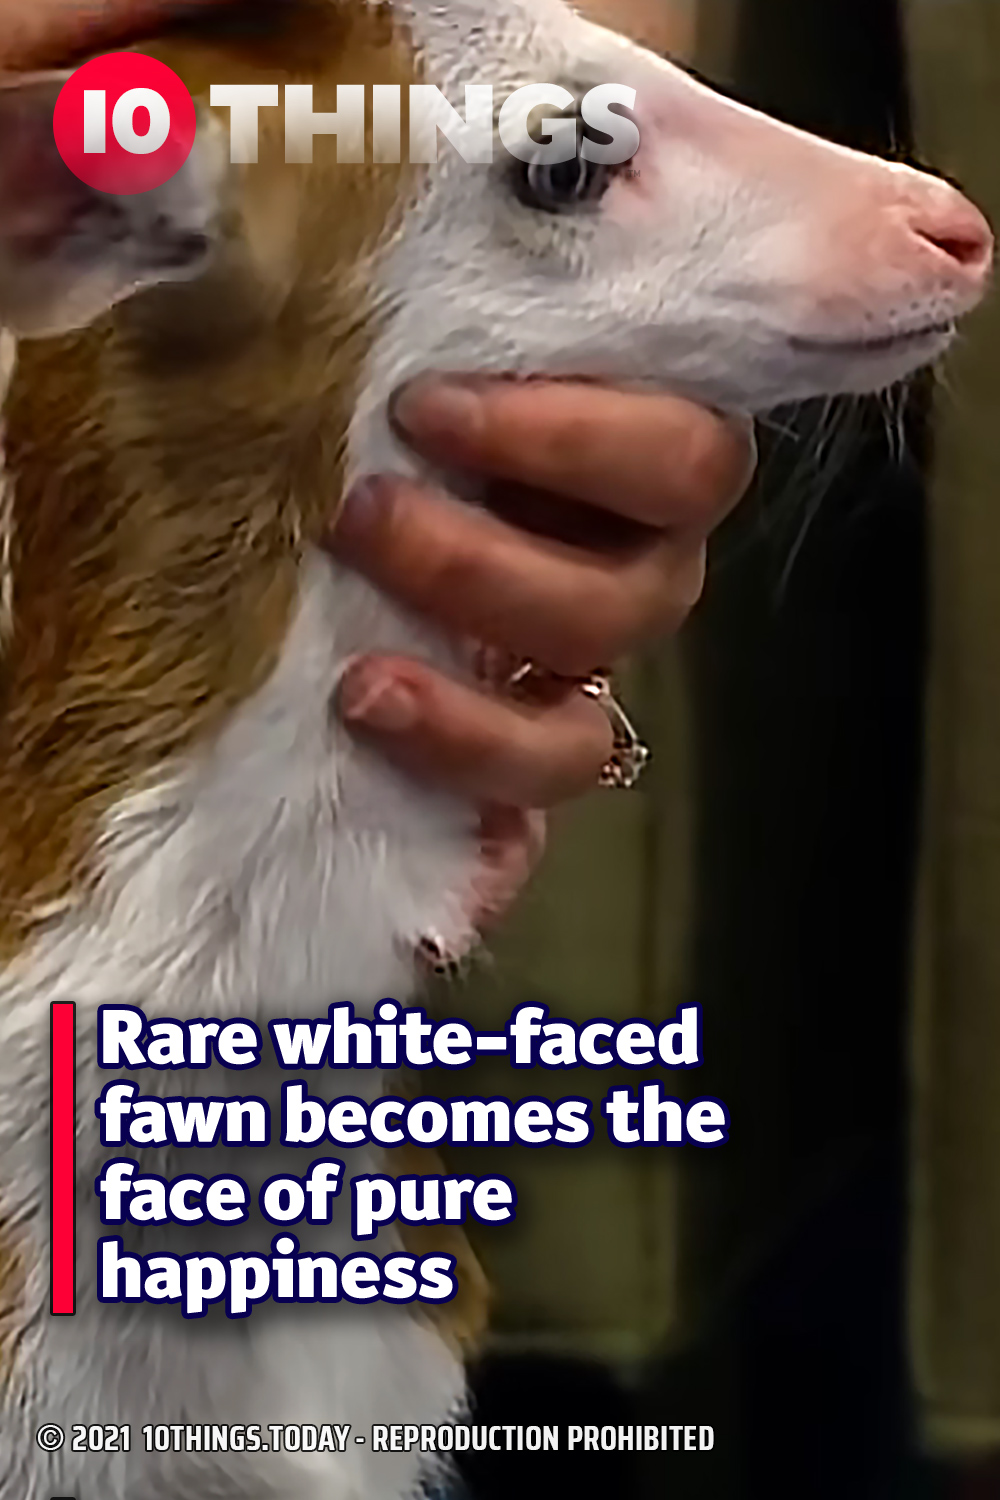 Rare white-faced fawn becomes the face of pure happiness